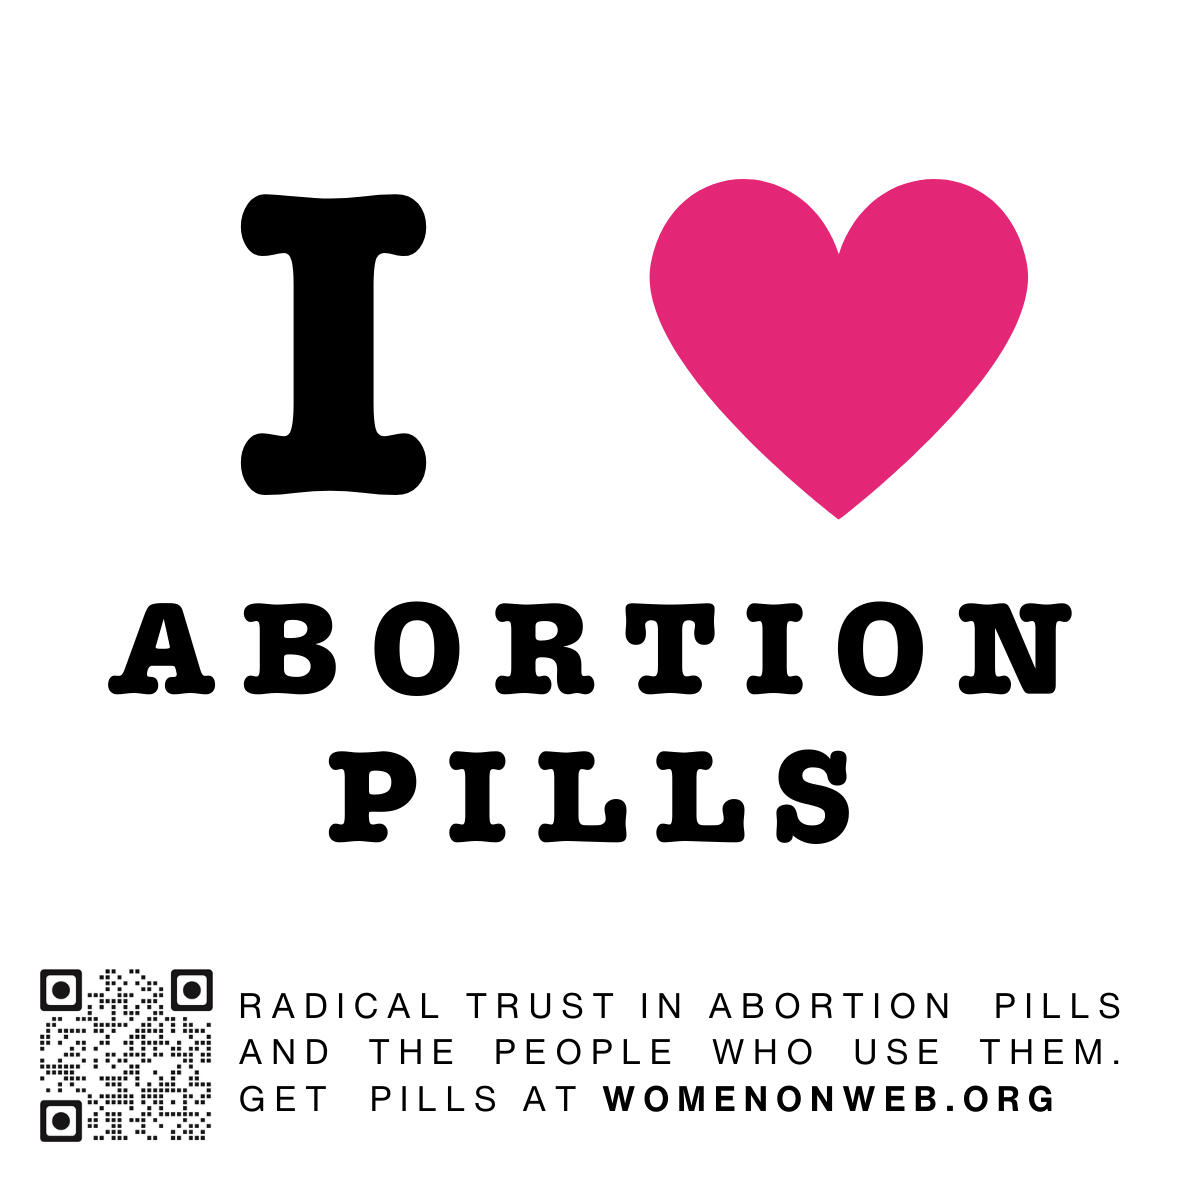 QR code encouraging and supporting women to access information on how they can safely do an abortion themselves.